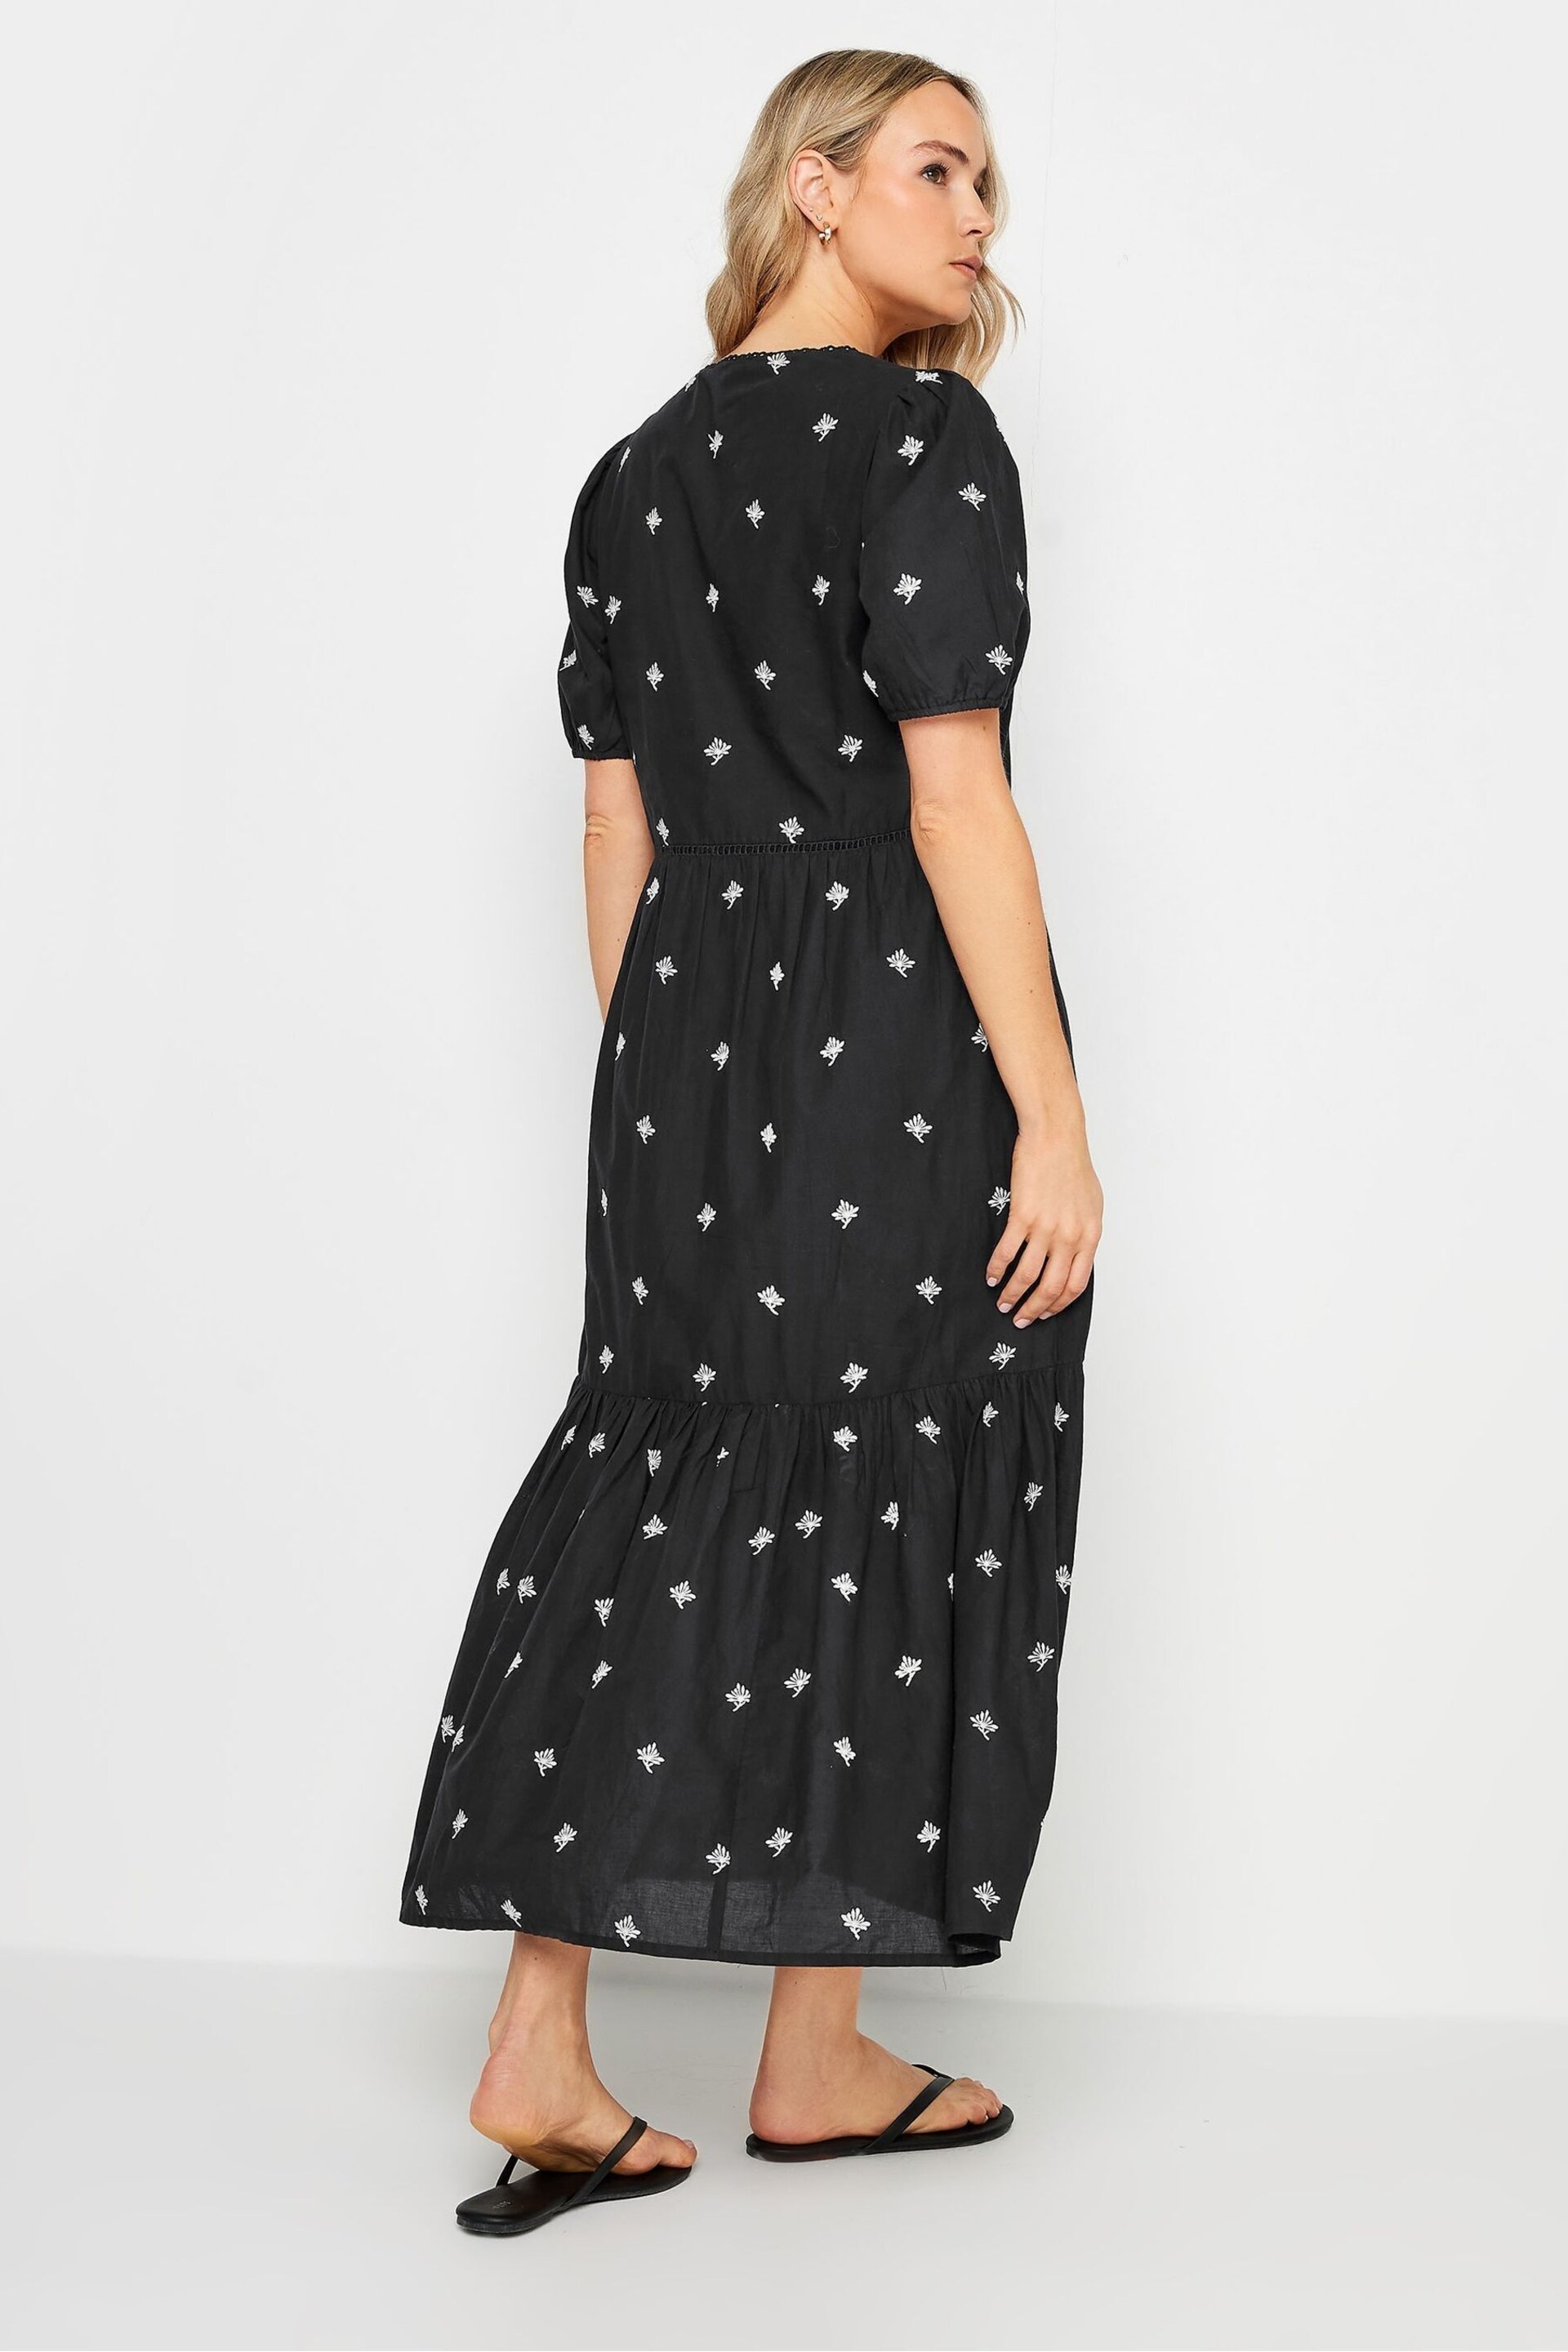 Long Tall Sally Black Embroidered V-Neck Tiered Dress - Image 5 of 6